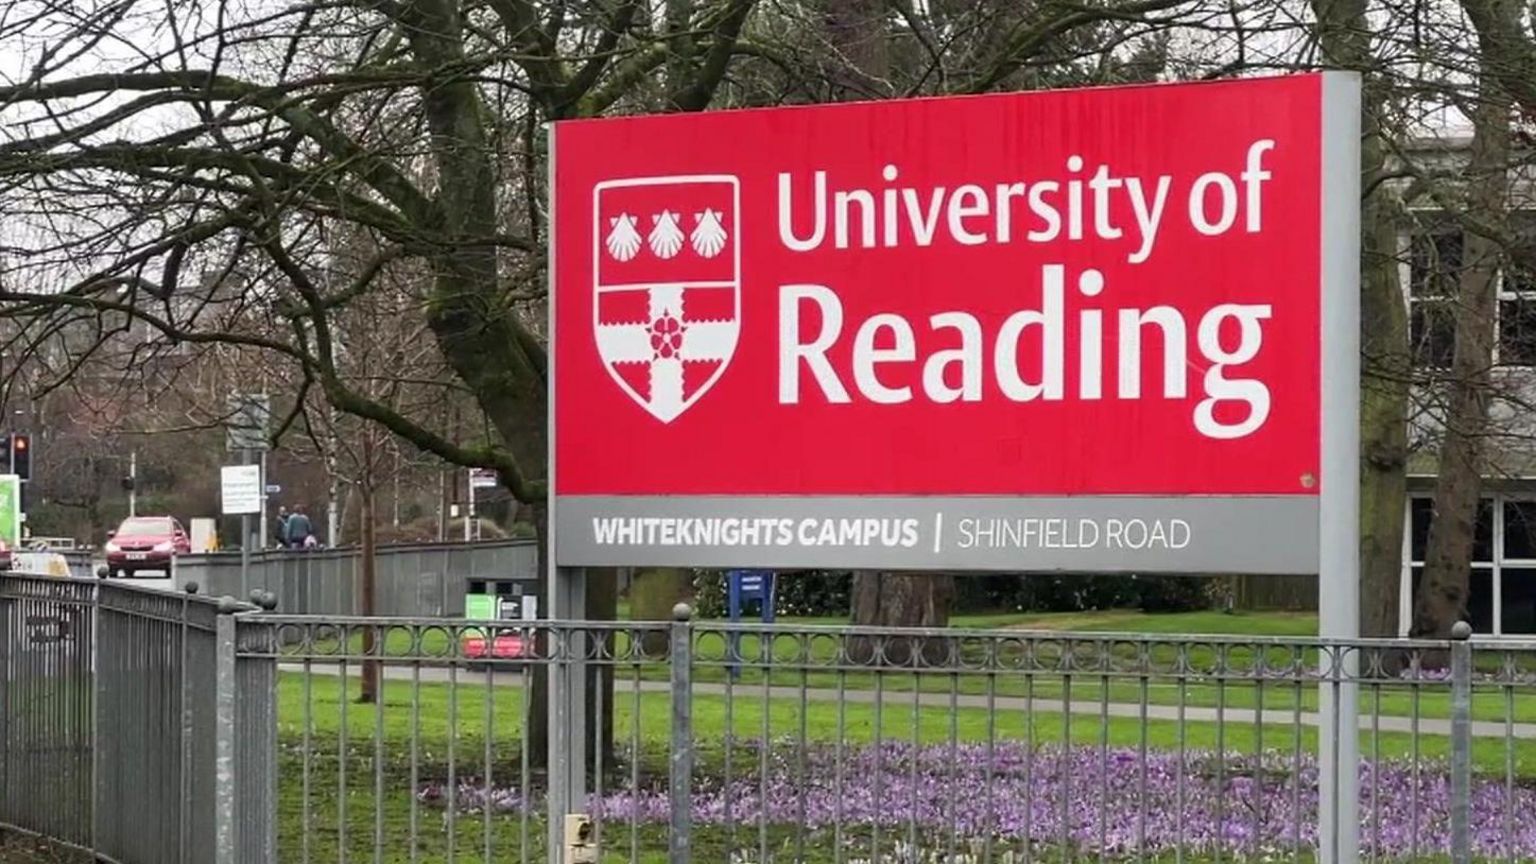 Red sign which reads University of Reading with a shield insignia. The sign is by a road. In front of the sign there is a metal railing. There are purple flowers underneath.